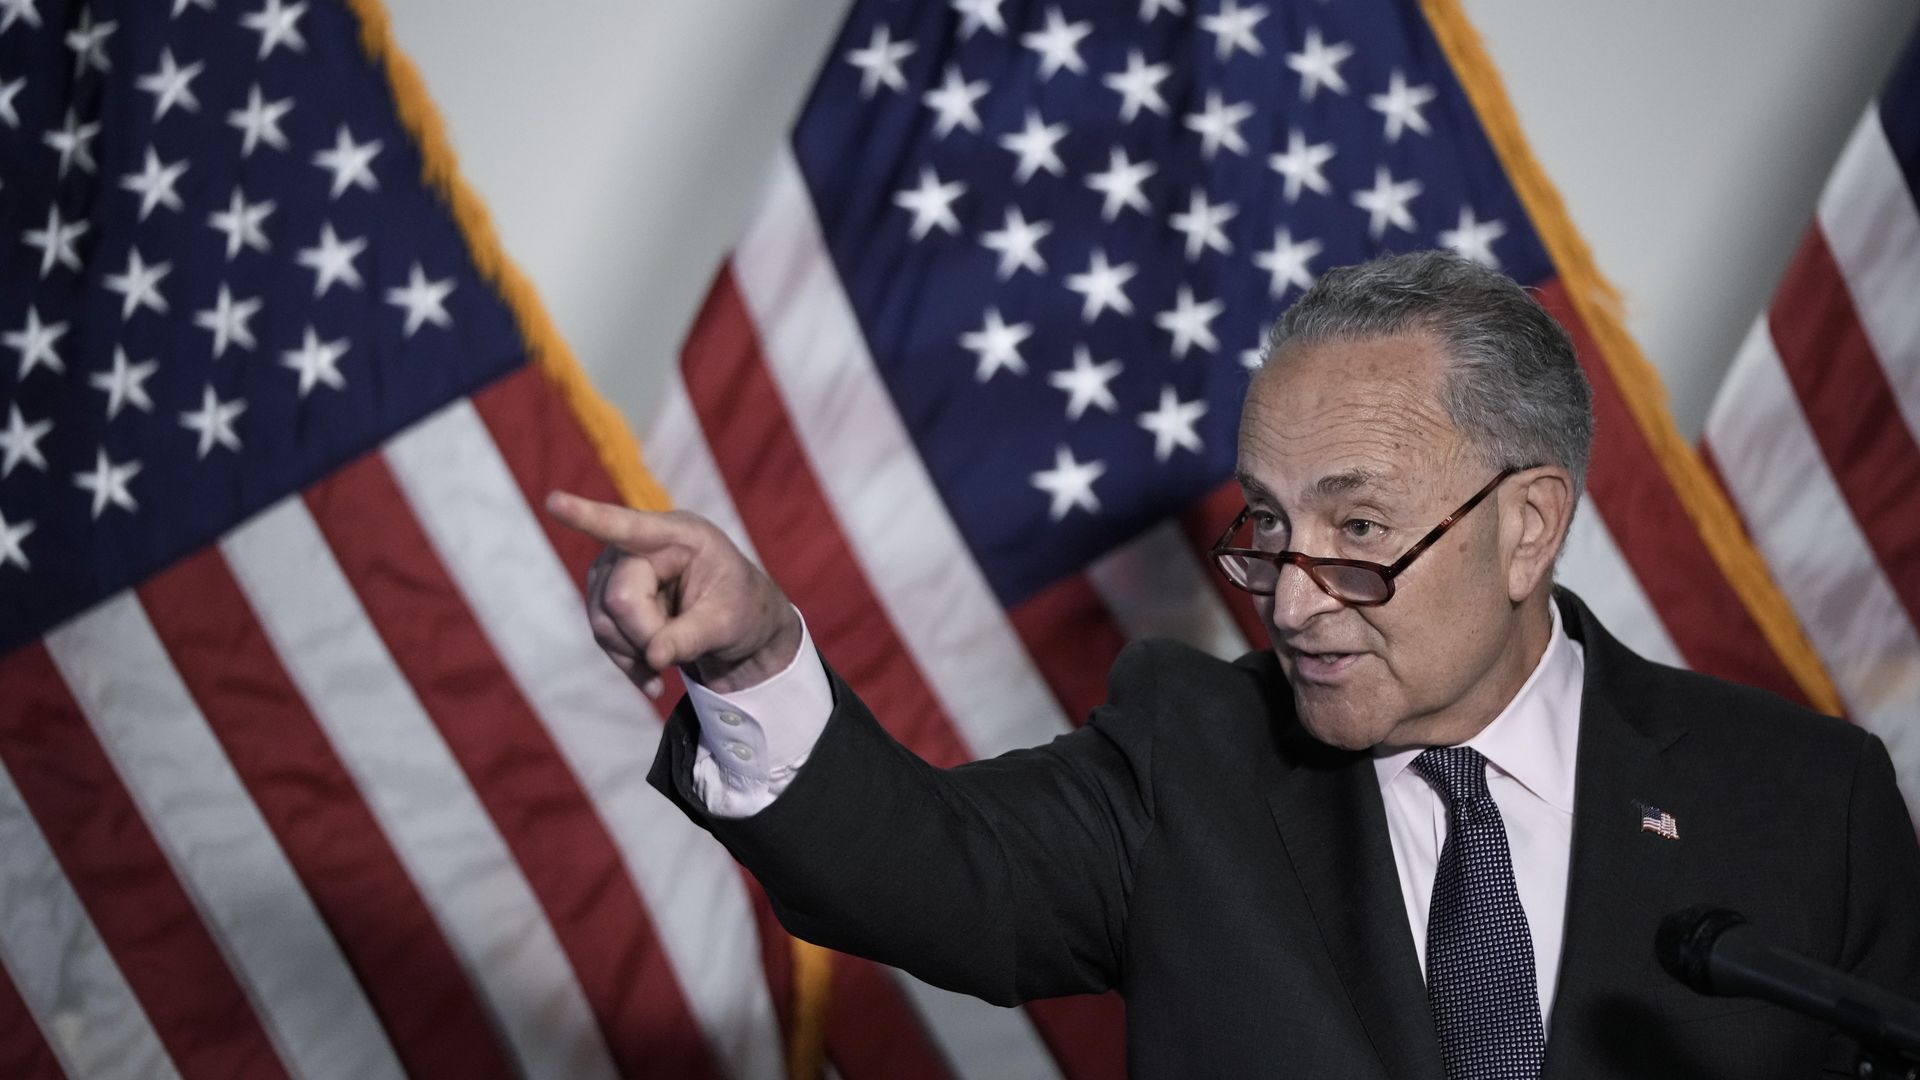 Senate Majority Leader Chuck Schumer (D-N.Y.) during a press conference on May 25.